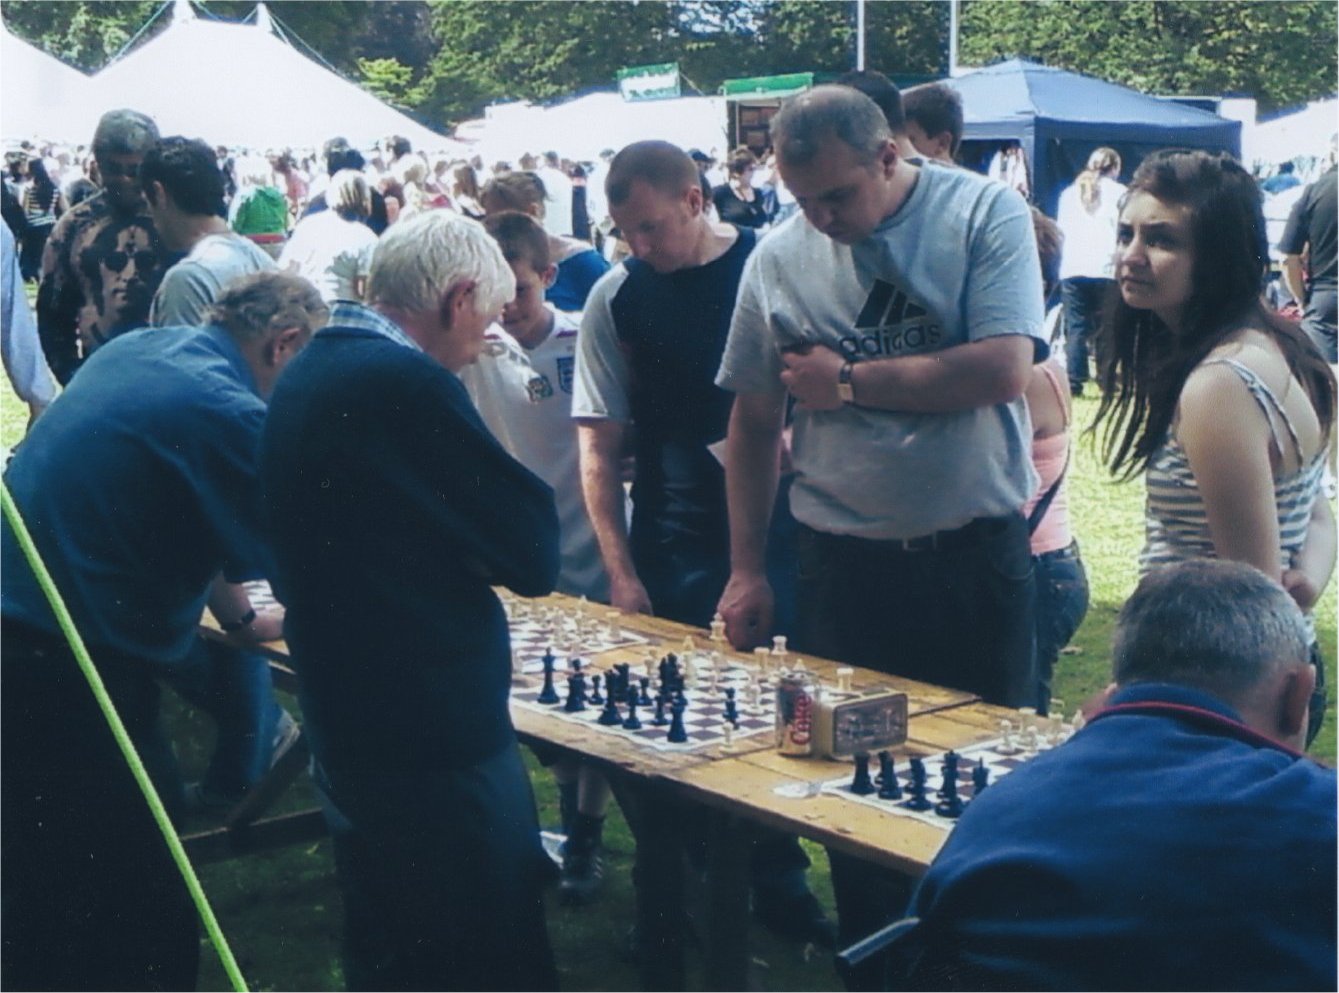 A popular stall and all busy playing Chess 